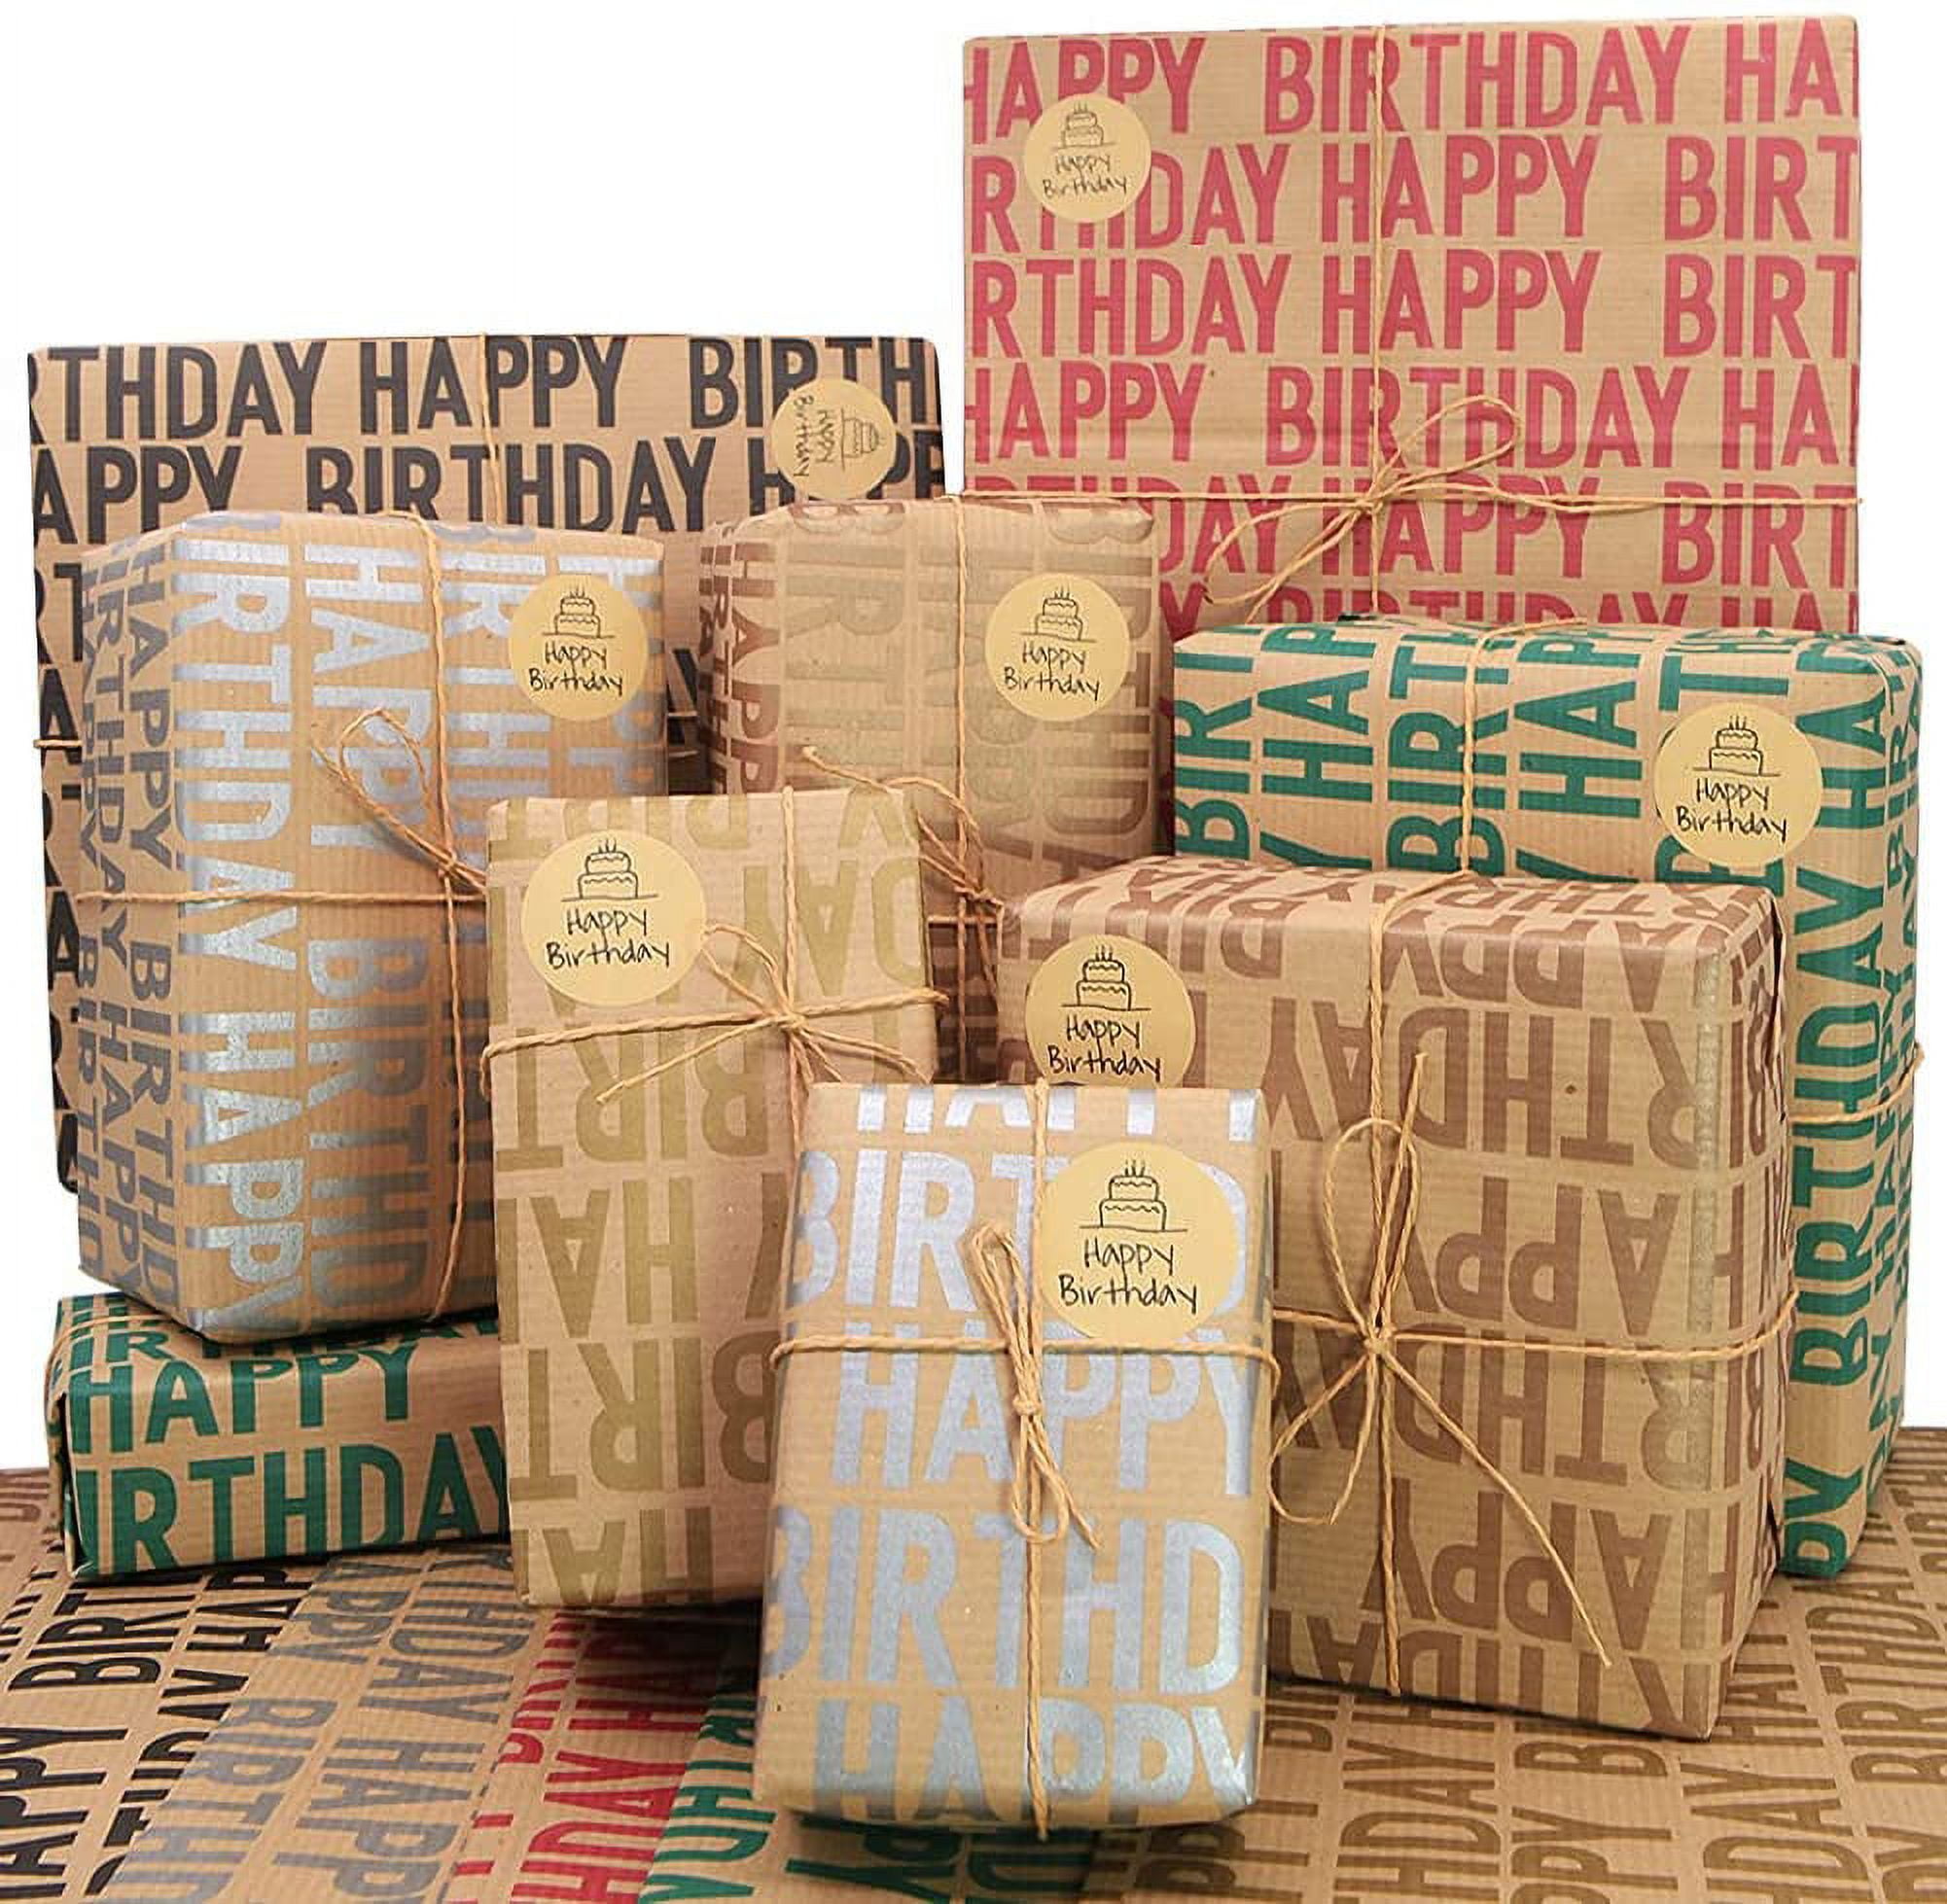  Happy Birthday Green Wrapping Paper For Men Women Boys Girls  Kids,Gift Wrap, 20 x 28 inches per sheet (6 sheets: 23 sq. ft. ttl.) Brown  KRecycled raft Folded Paper for Baby